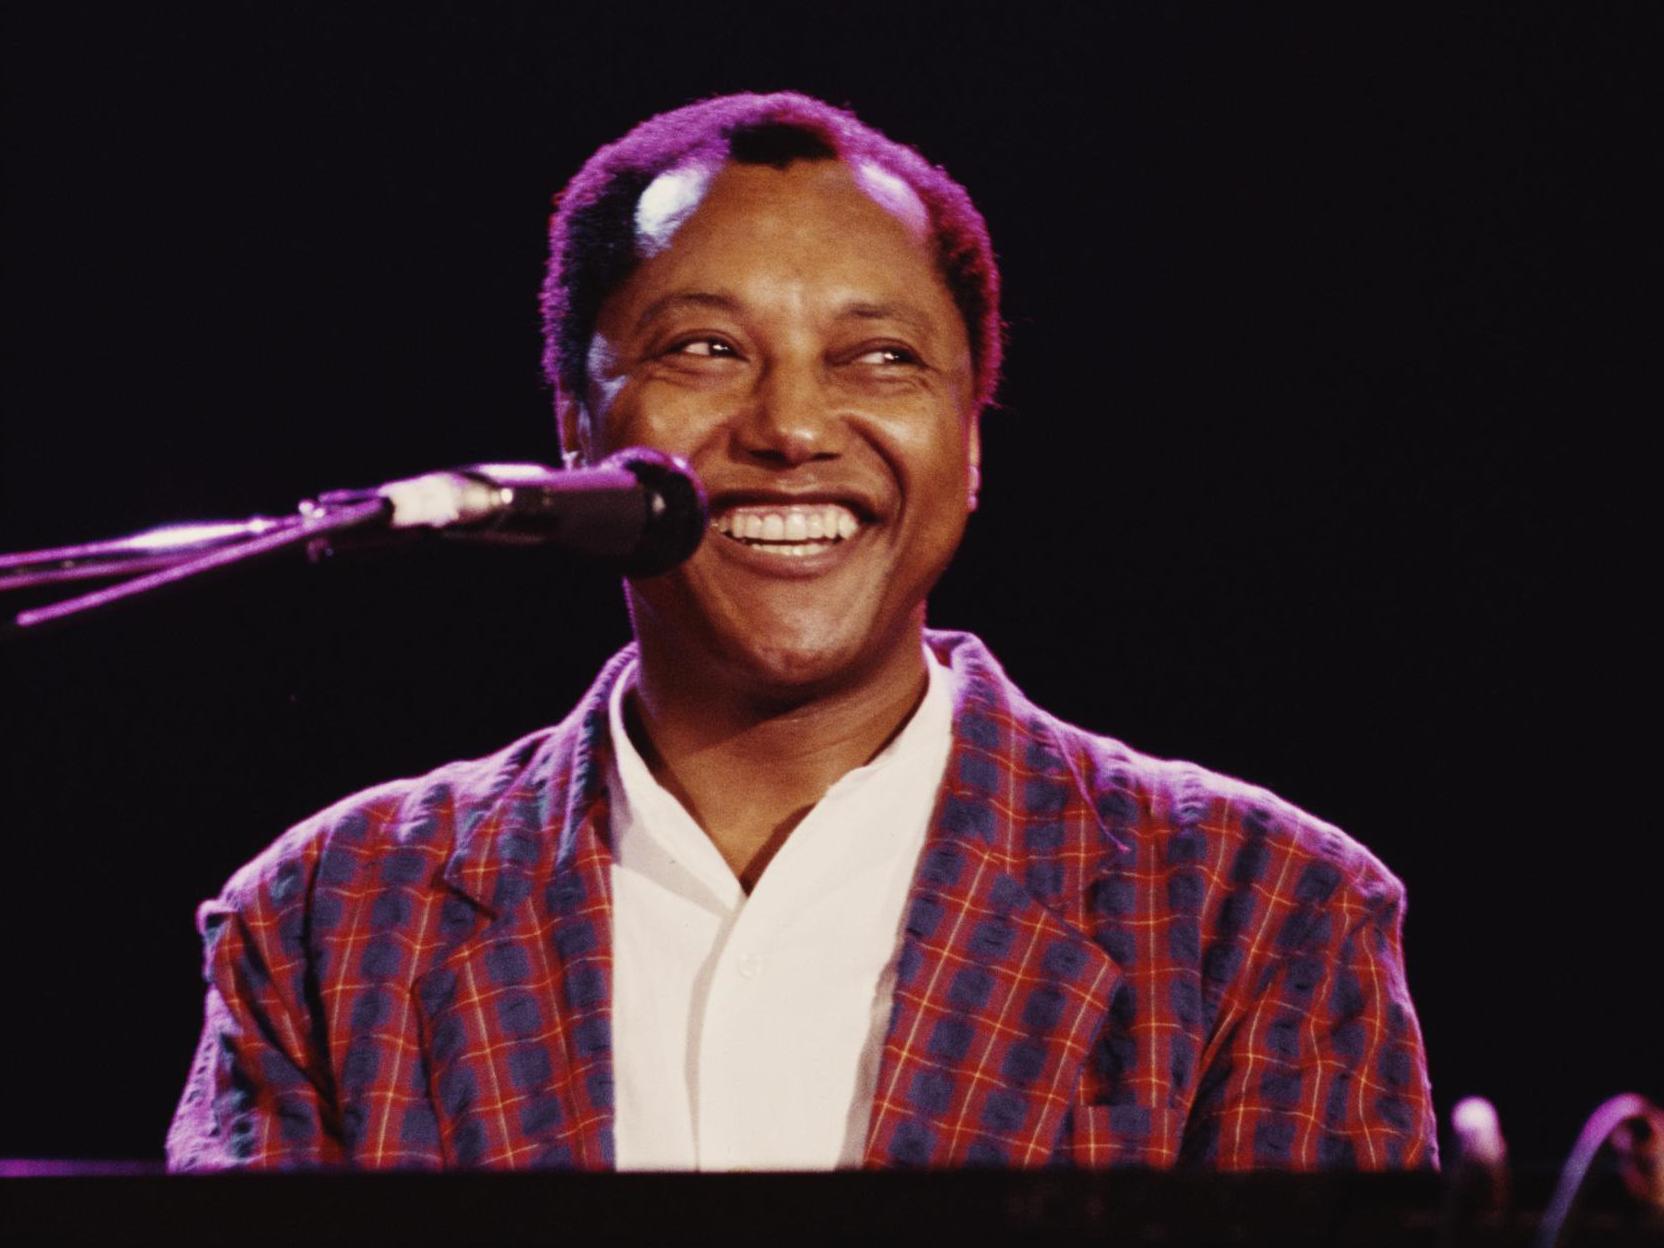 Labi Siffre performs at the 1987 Prince’s Trust Concert at Wembley Arena